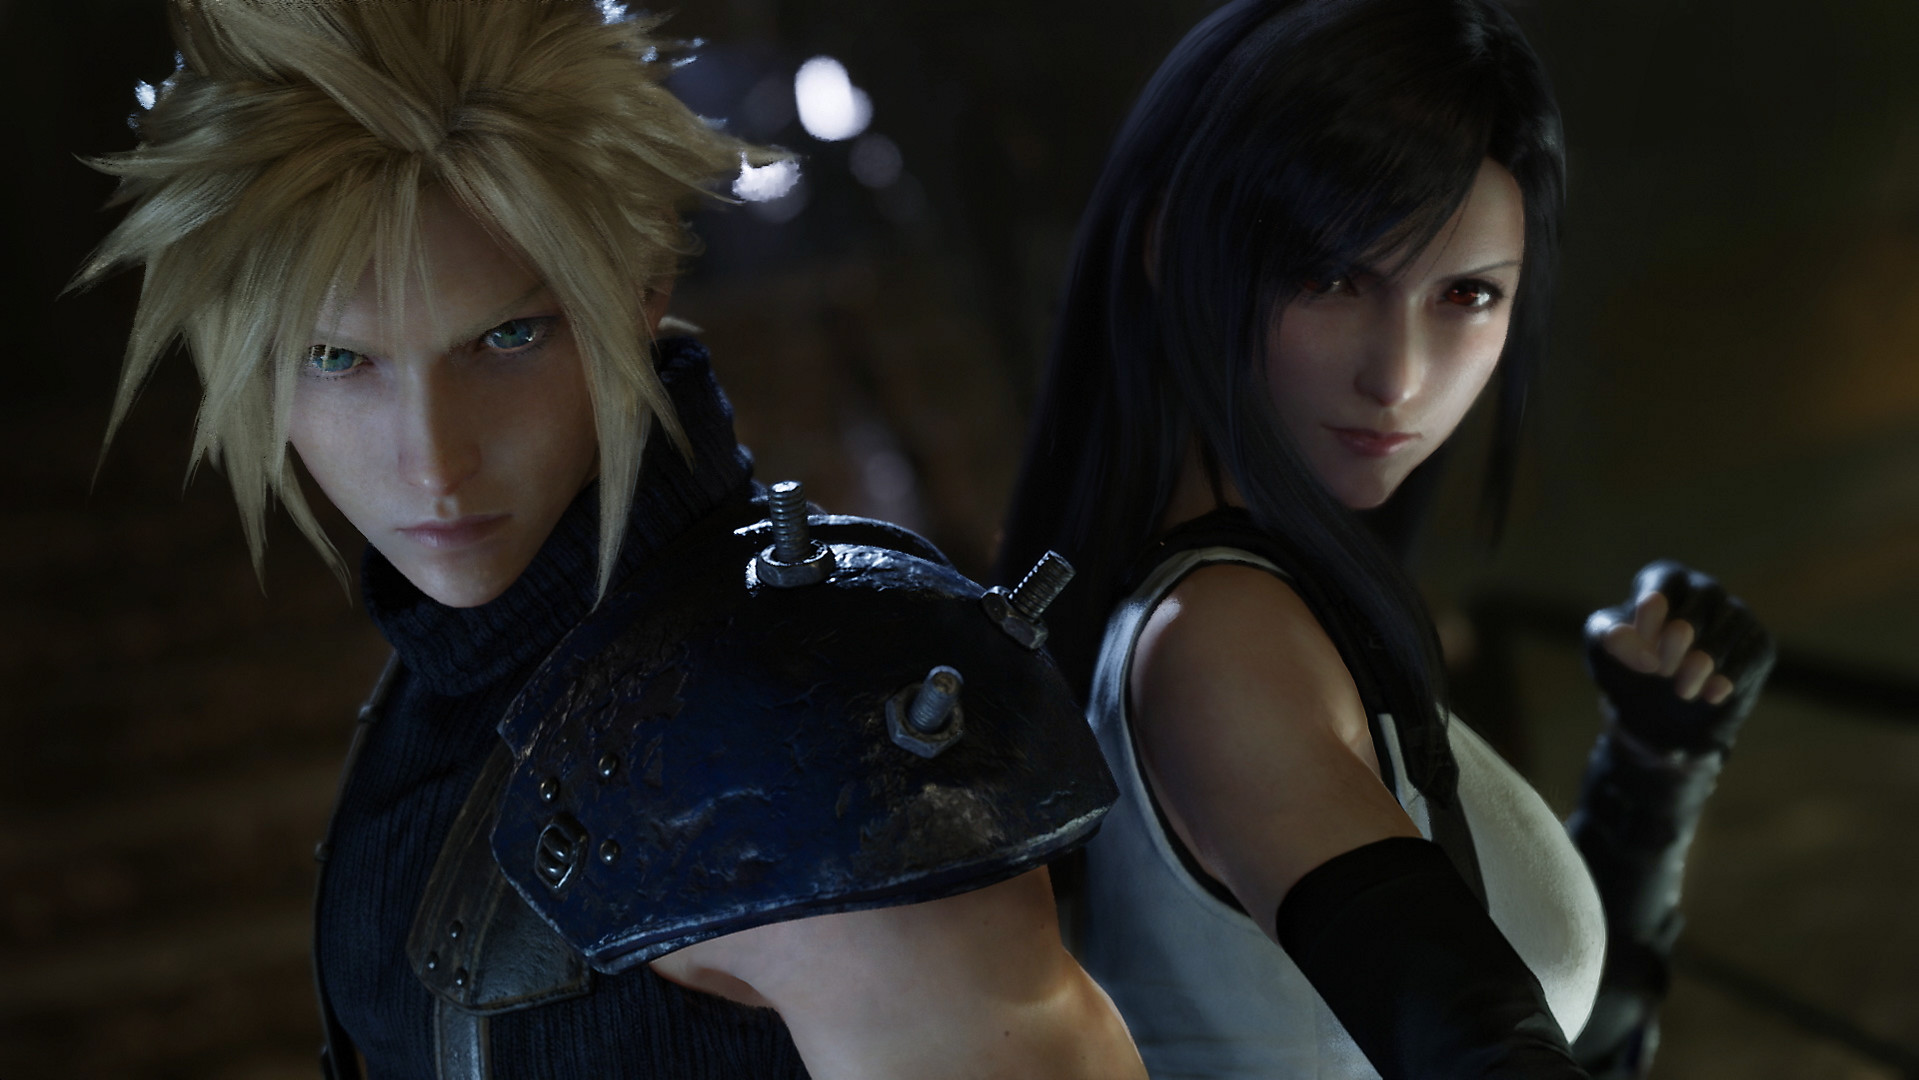 Final Fantasy Vii Remake Received Six Nods, Including Best Role Playing.